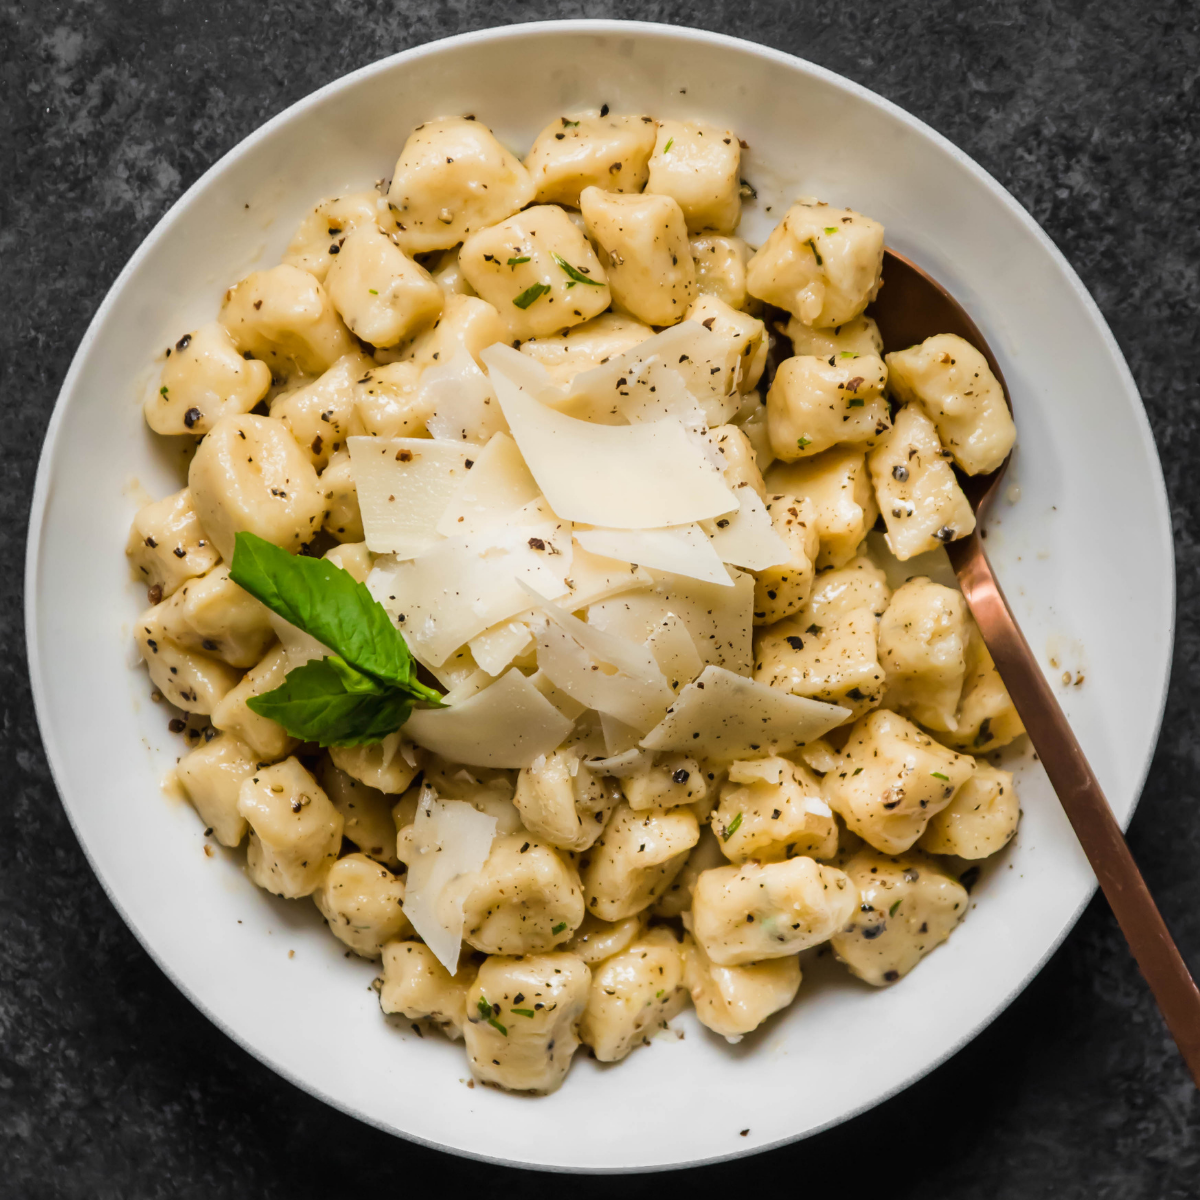 Gnocchi with shaved parmesan in a shallow white bowl on a dark table.